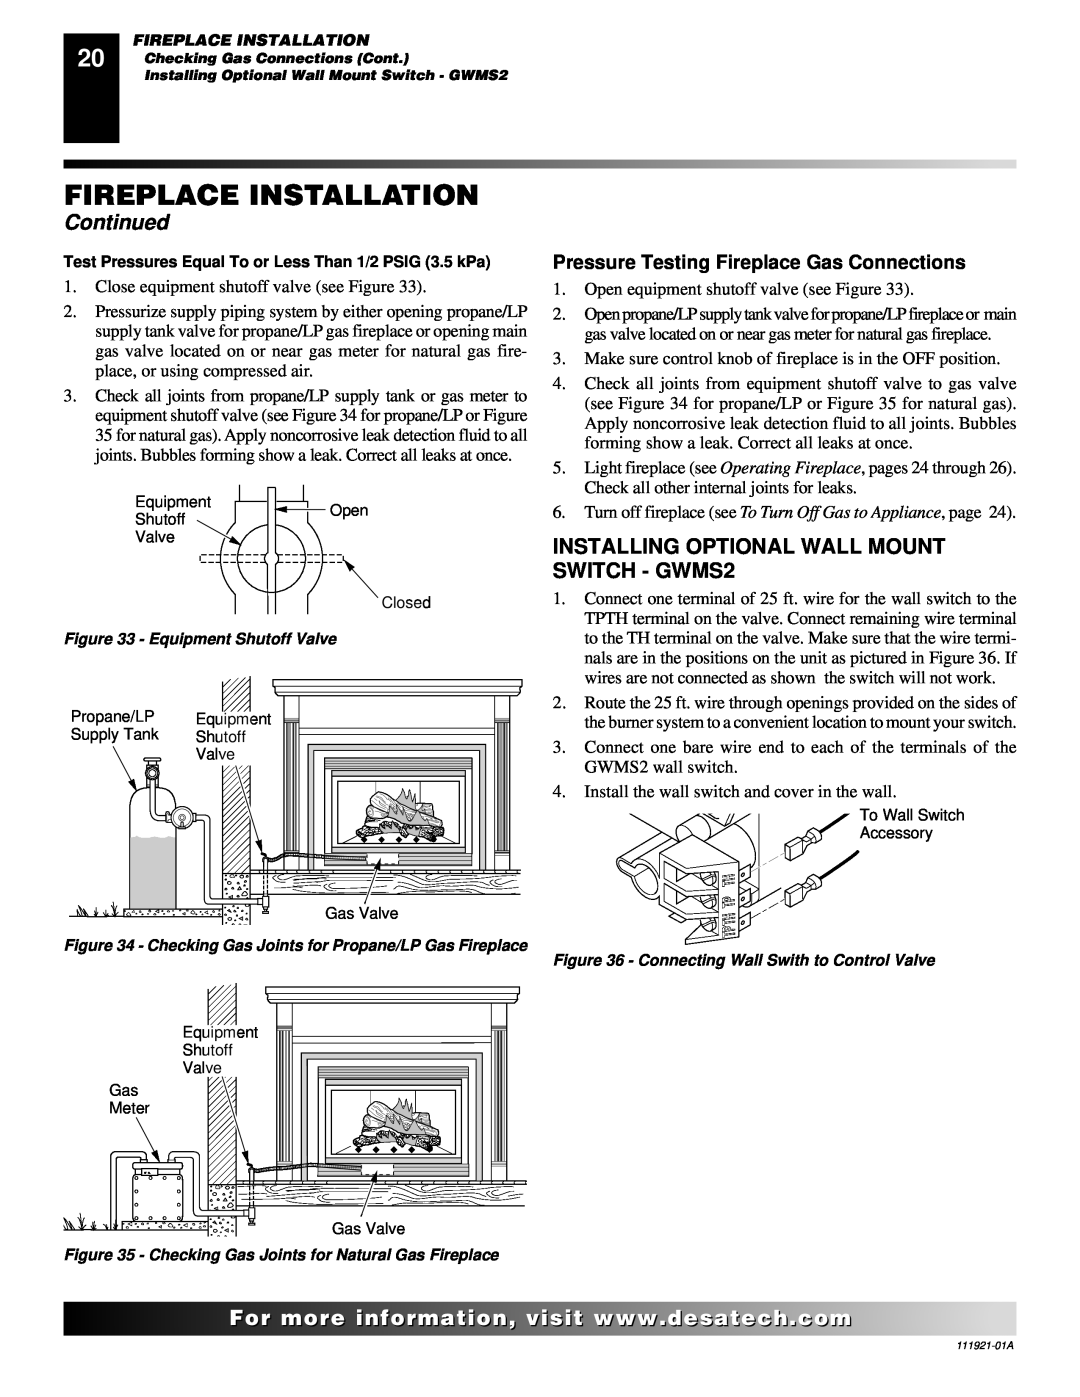 Desa (V)K42N installation manual INSTALLING OPTIONAL WALL MOUNT SWITCH - GWMS2, Fireplace Installation, Continued 